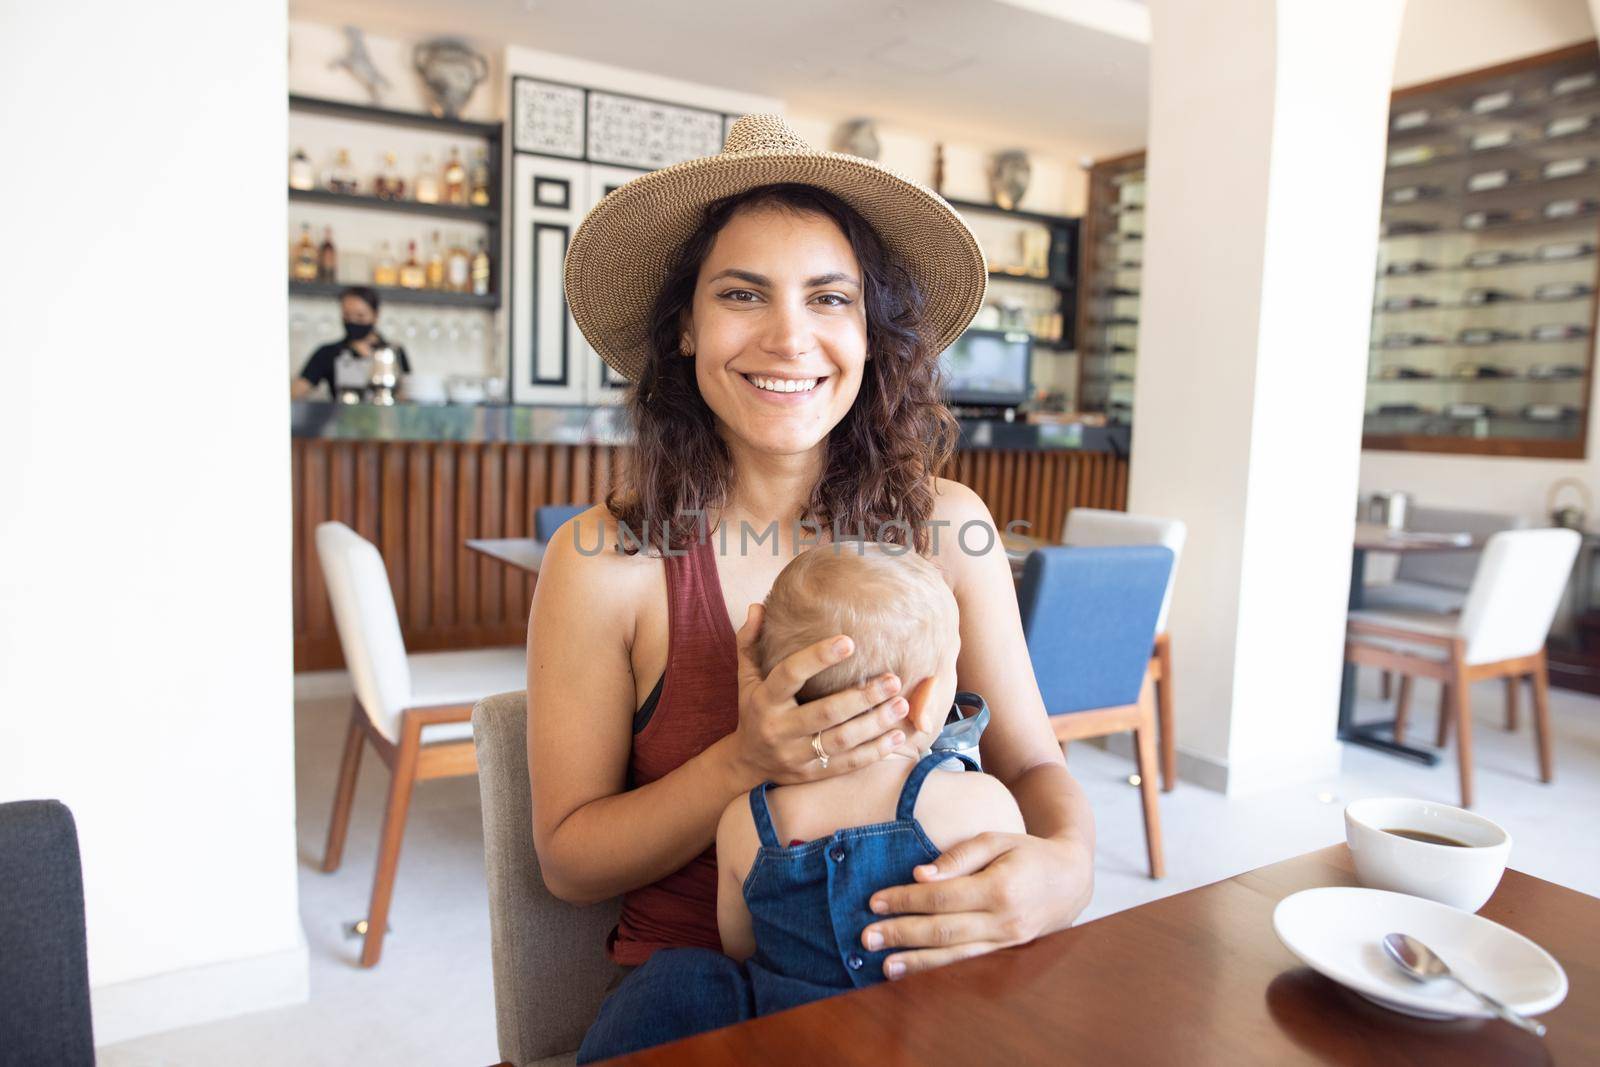 Portrait of beautiful smiling mother wearing a hat and holding adorable baby in restaurant. Happy brunette woman and young daughter at table with cafe counter as background. Family having breakfast